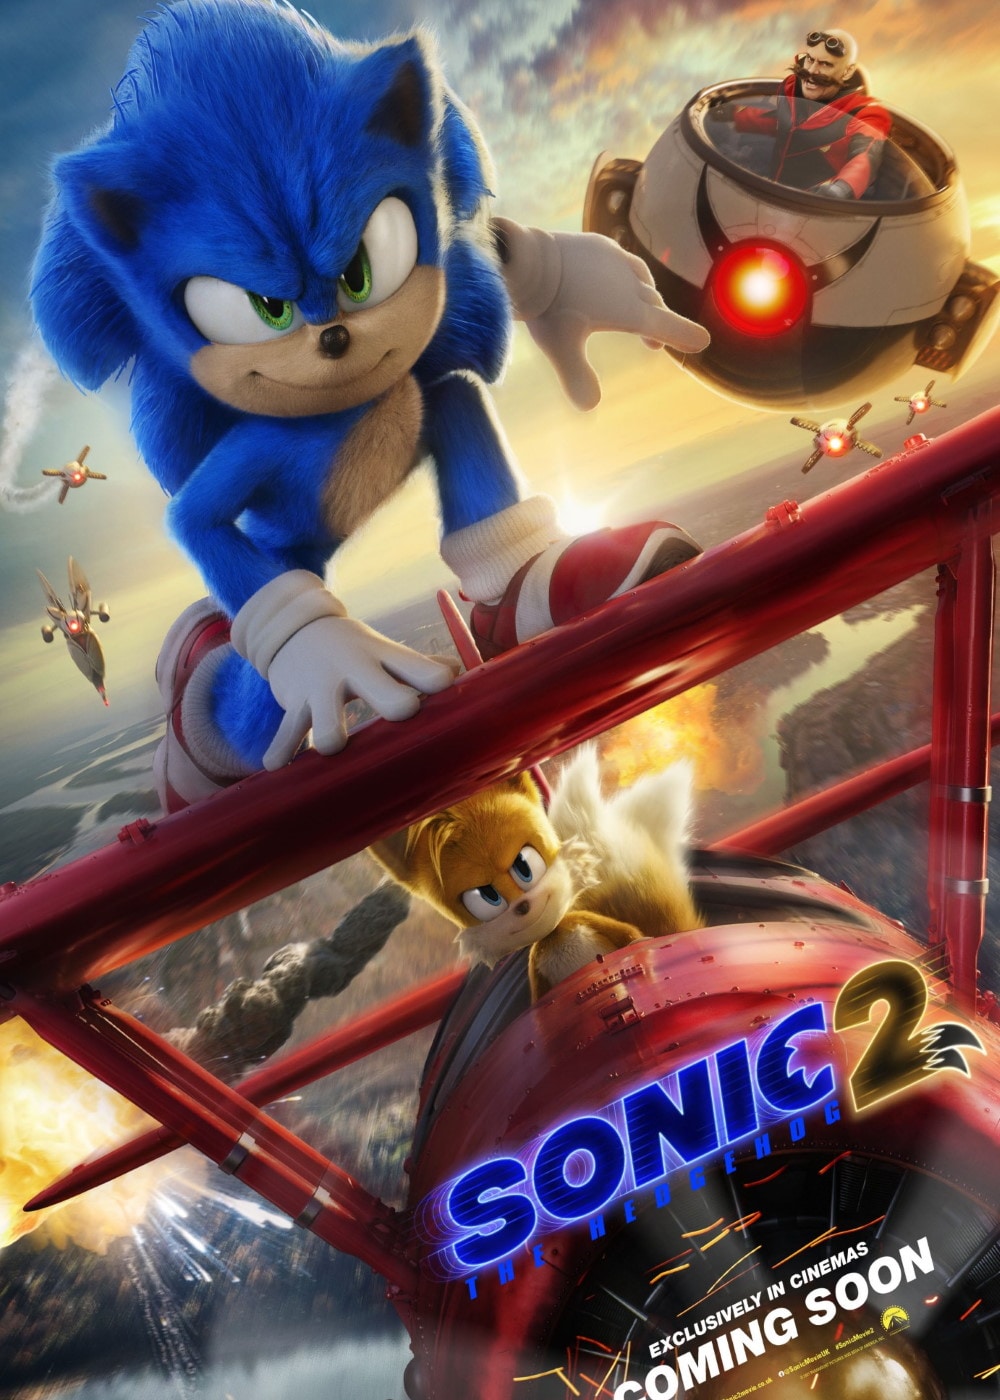 Sonic the Hedgehog on X: #SonicMovie is the Number 1 movie in the world!  Experience the GENESIS of your favorite blue hero in theatres now..see  what we did there? 🎟️ ➡️